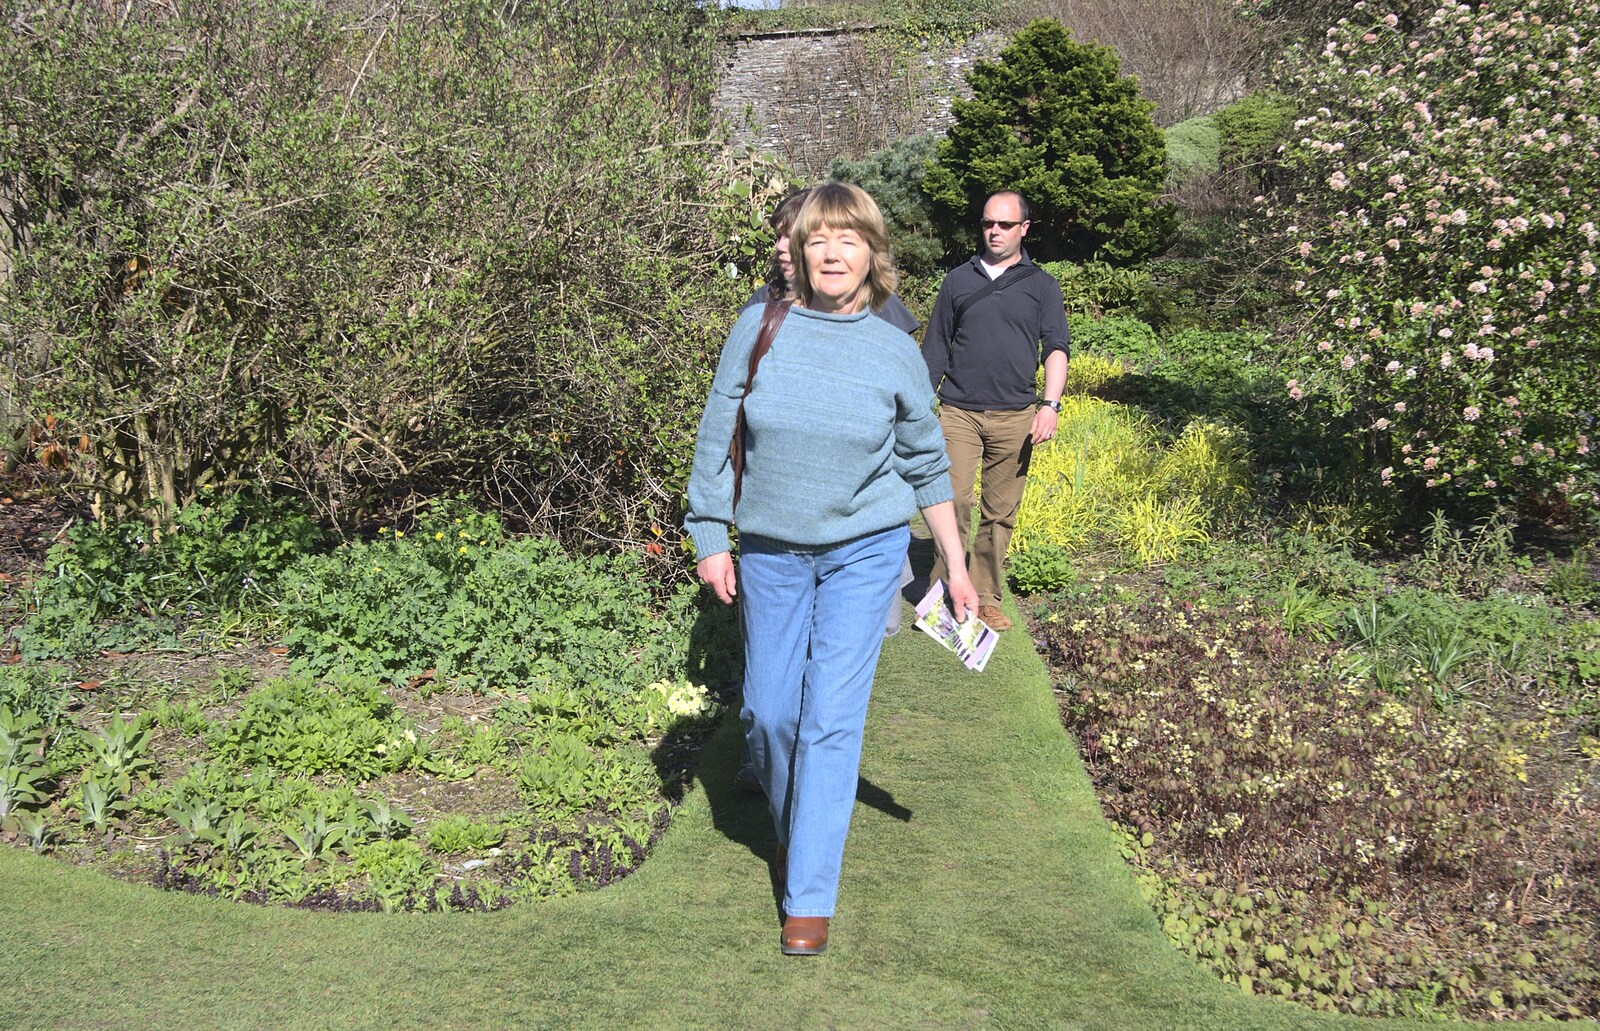 Mother strides about from An Easter Weekend in Chagford, Devon - 12th April 2009